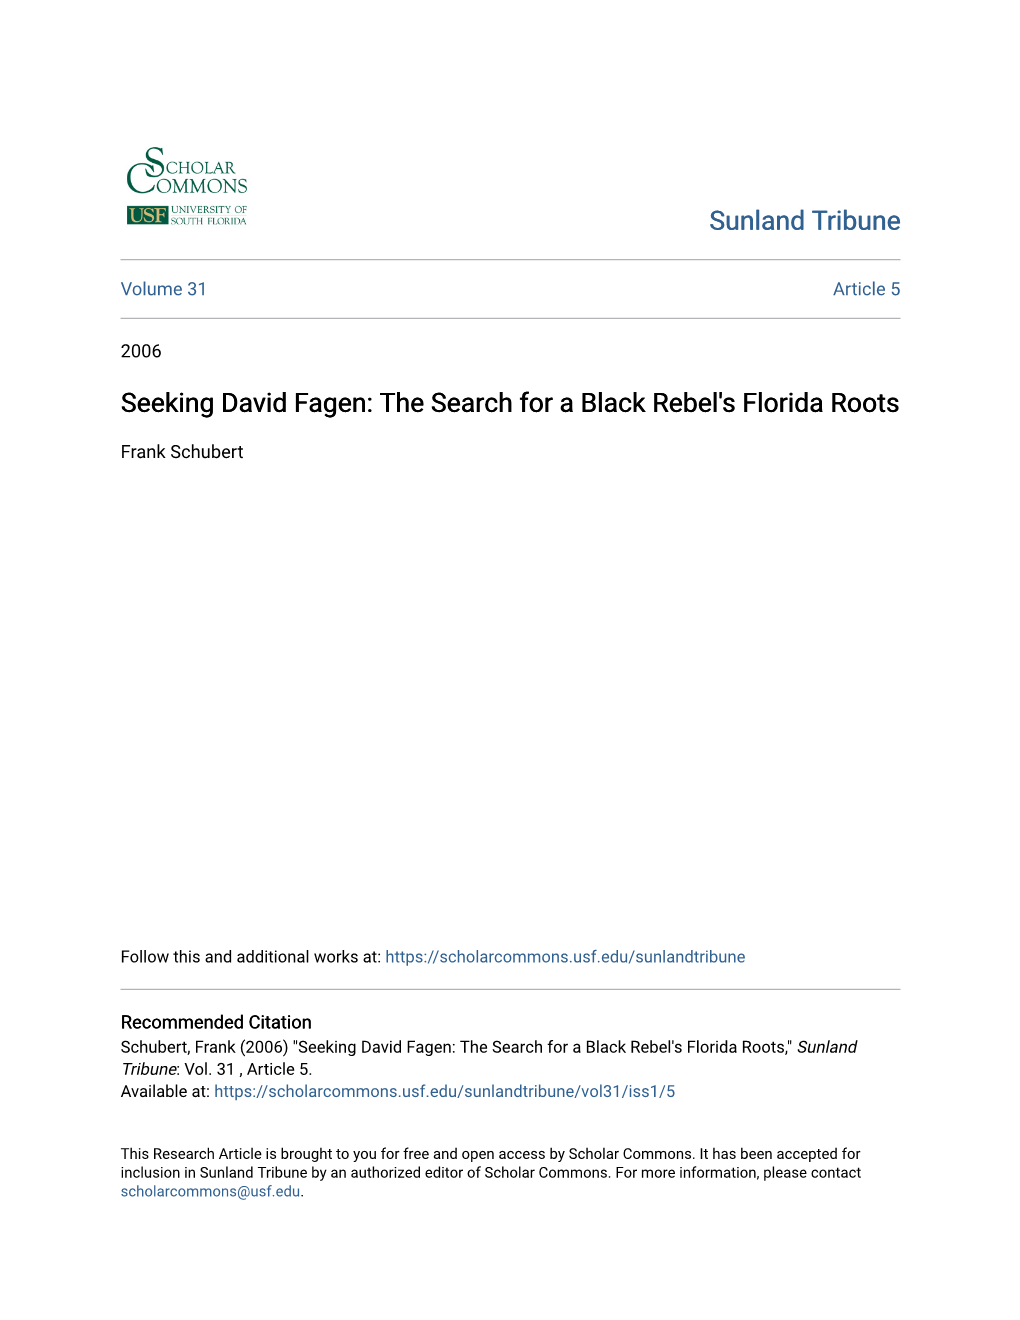 Seeking David Fagen: the Search for a Black Rebel's Florida Roots